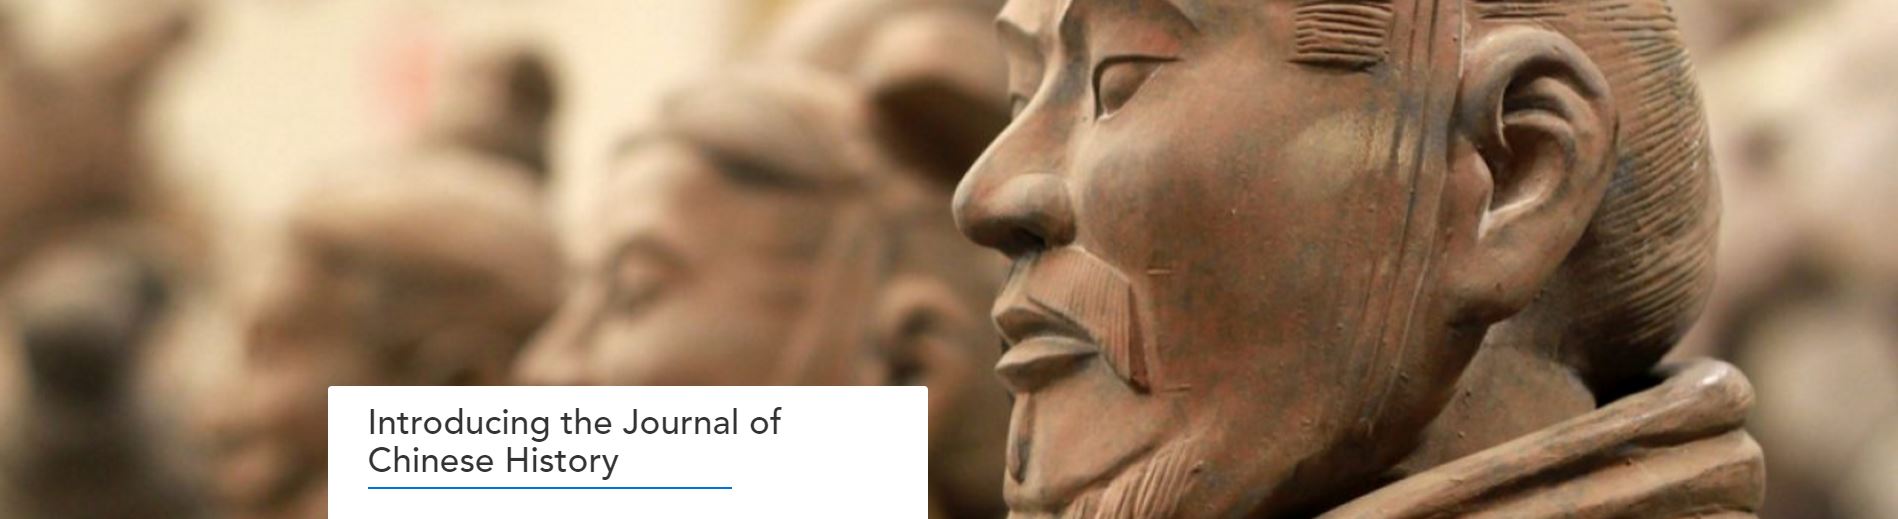 Link to Introducing the Journal of Chinese History blog post